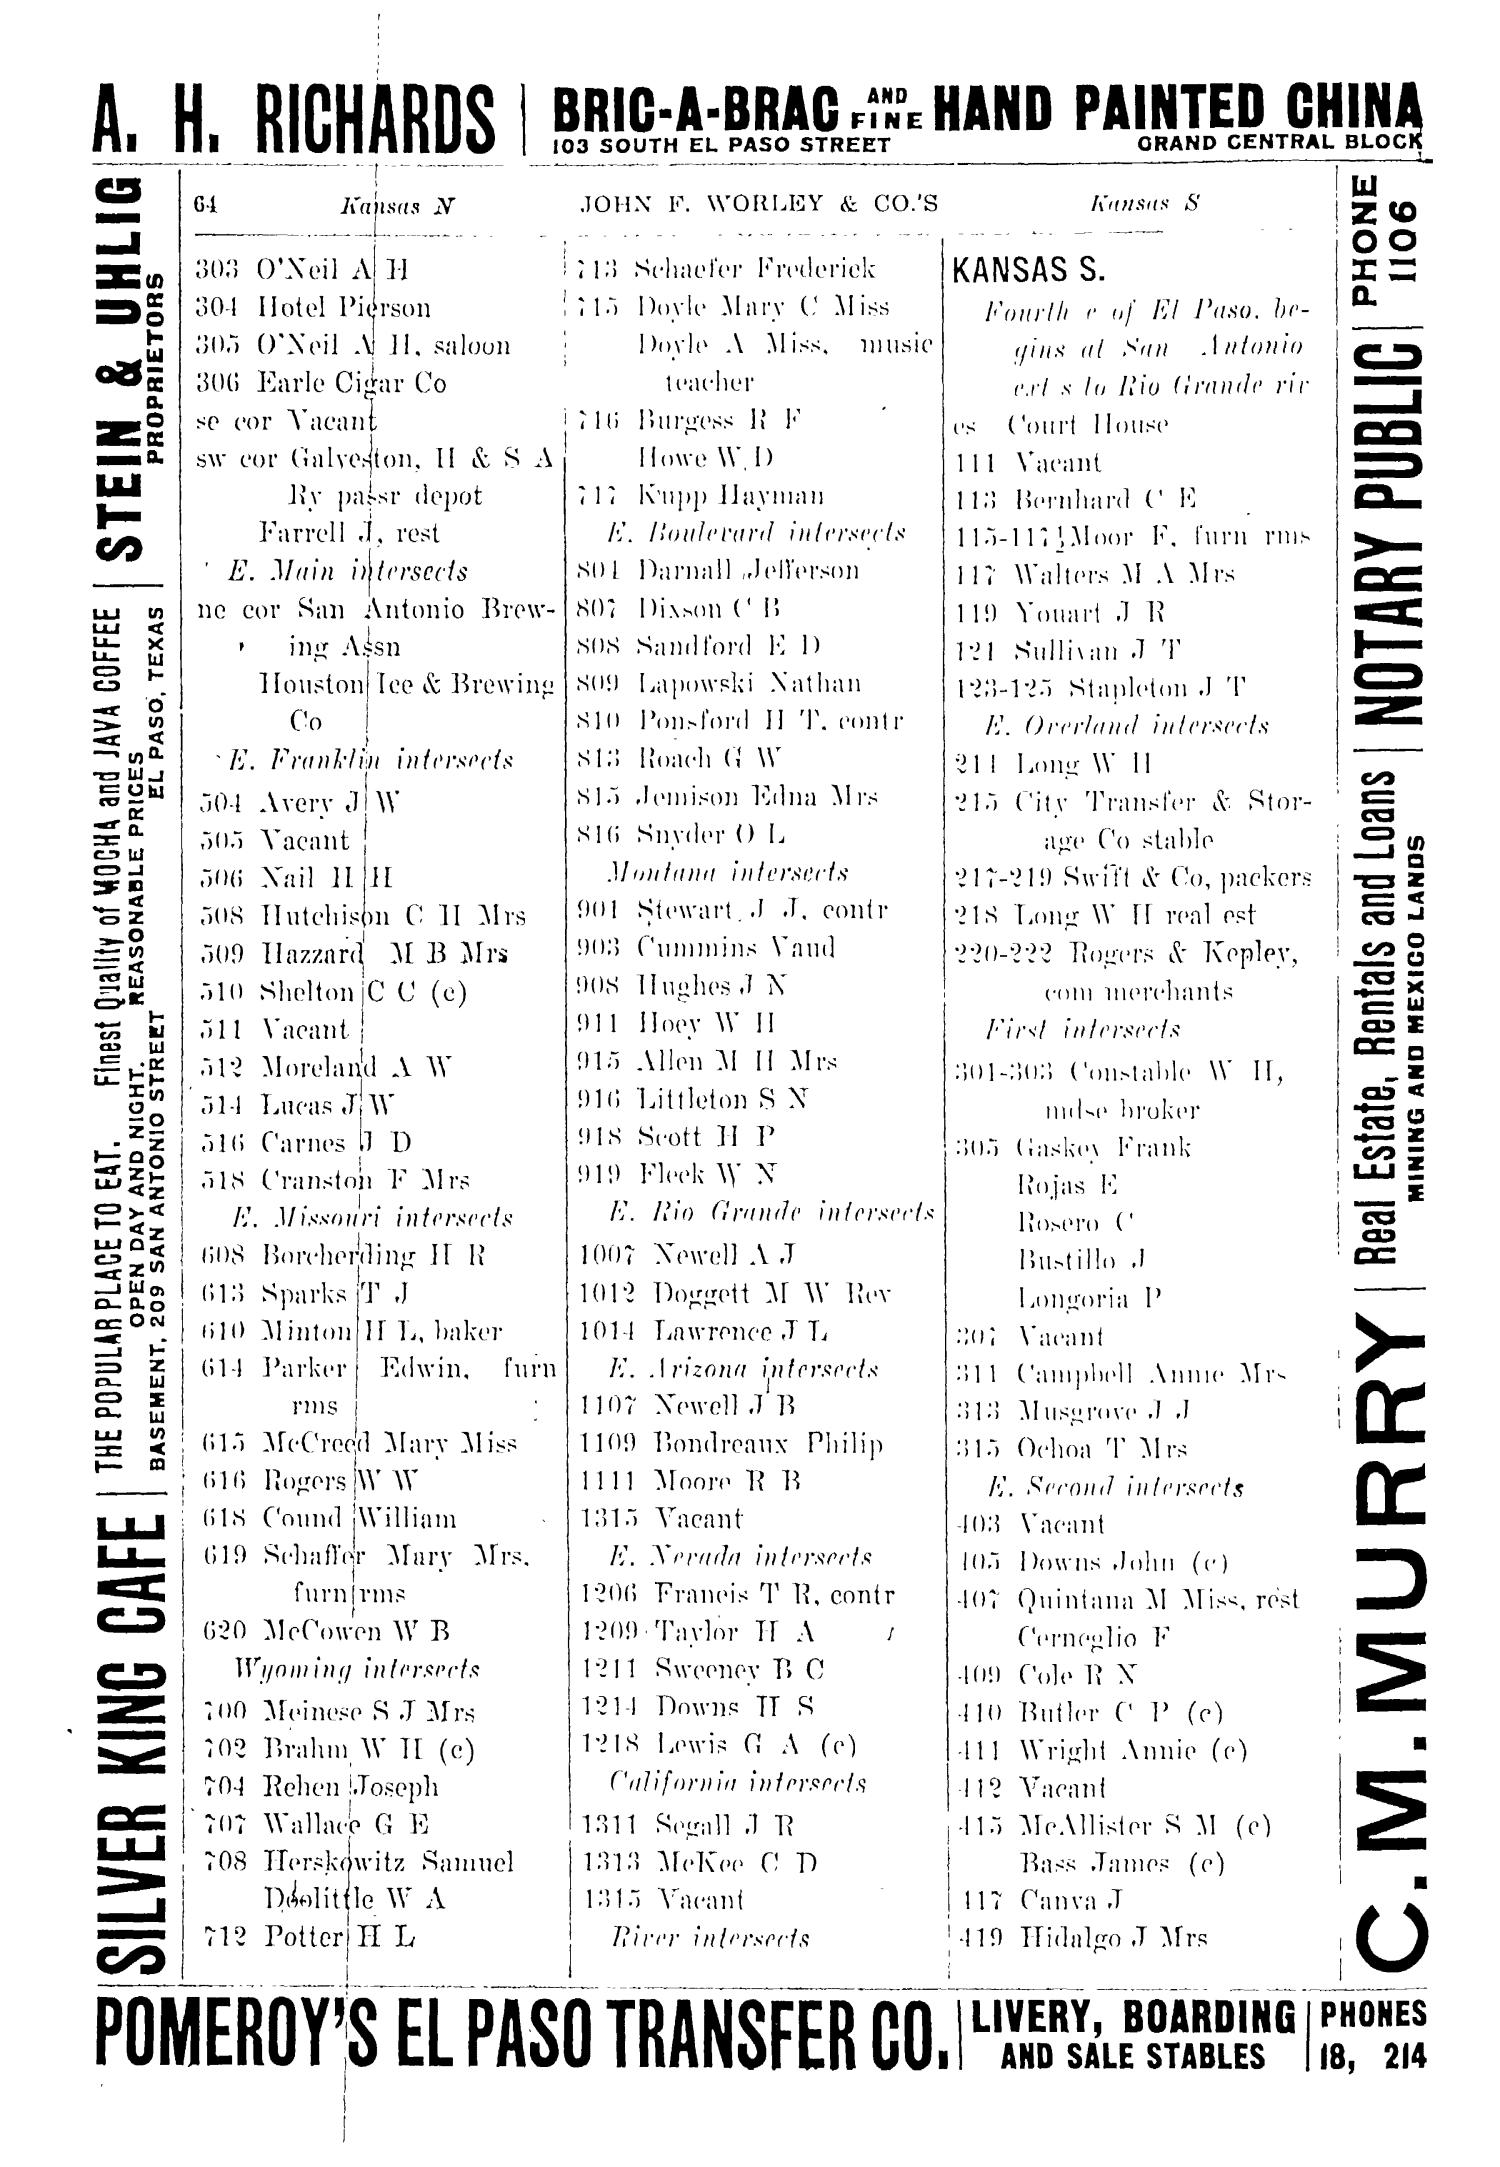 John F. Worley & Co.'s El Paso Directory for 1906
                                                
                                                    64
                                                